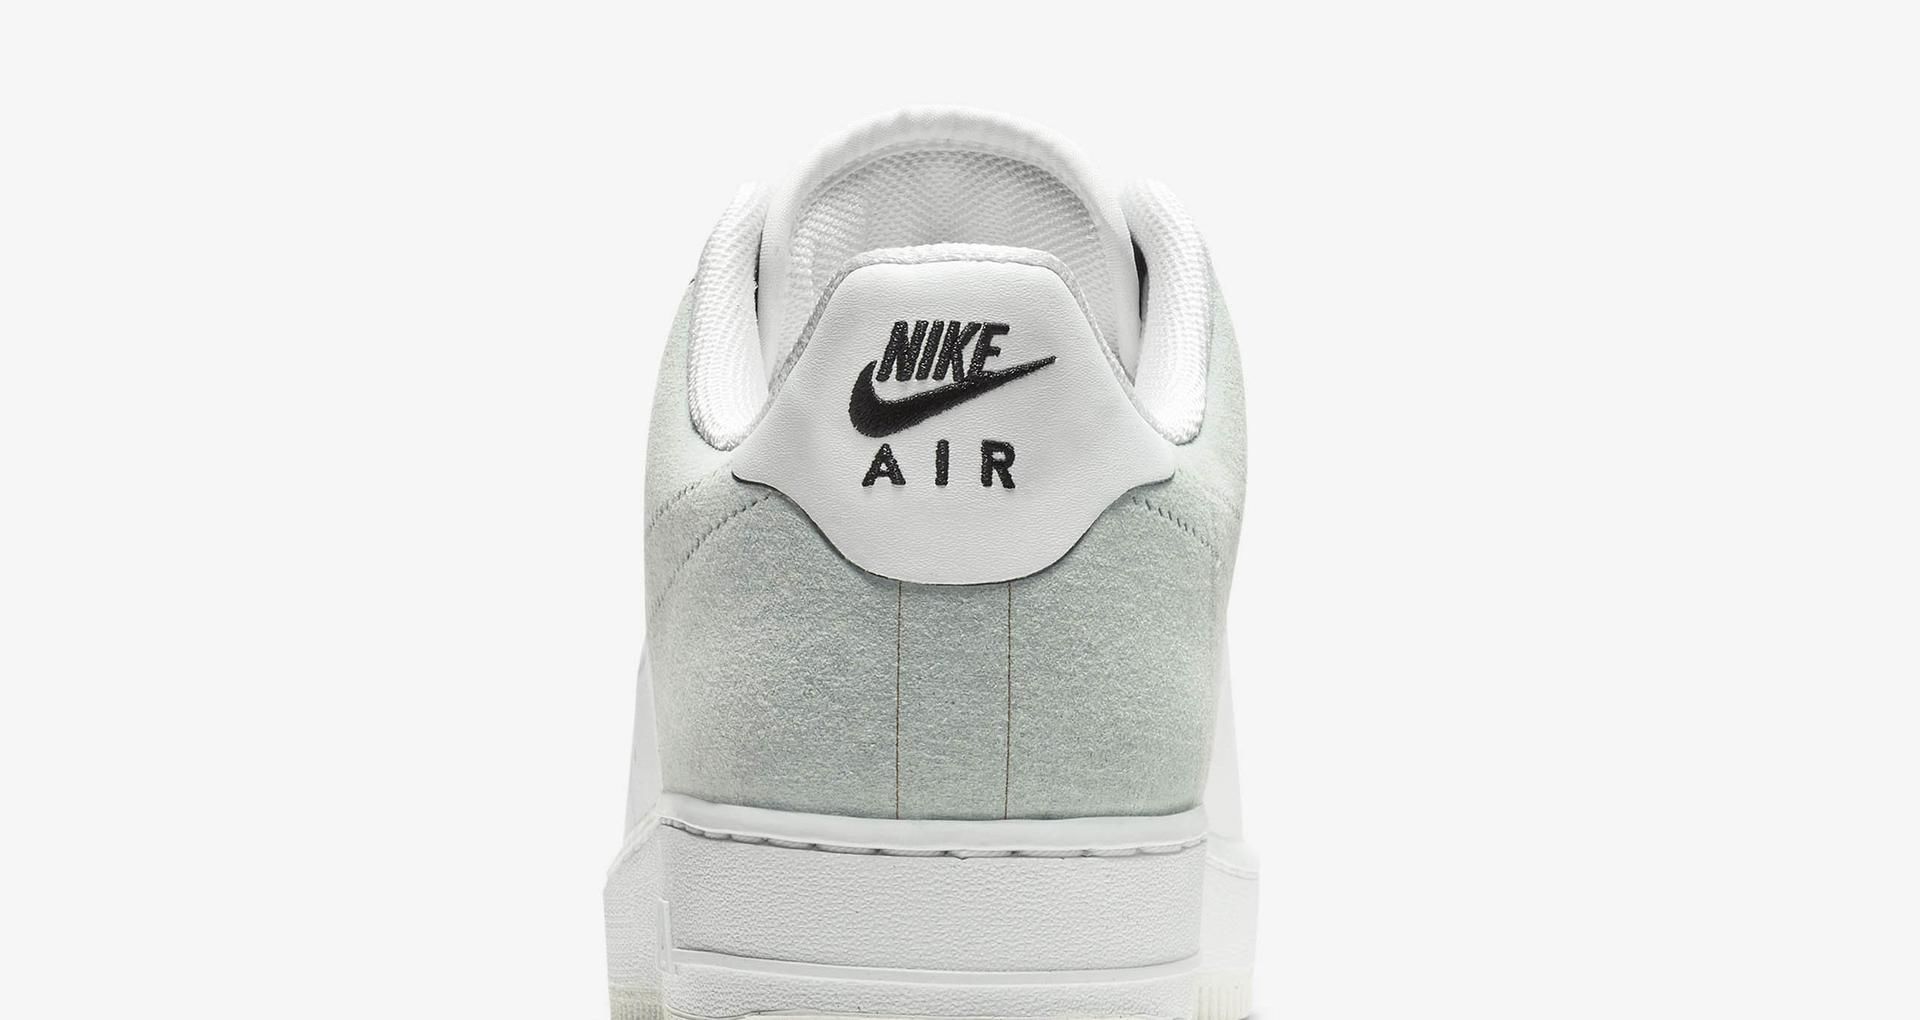 010-nike-air-force-1-low-a-cold-wall-white-bq6924-100